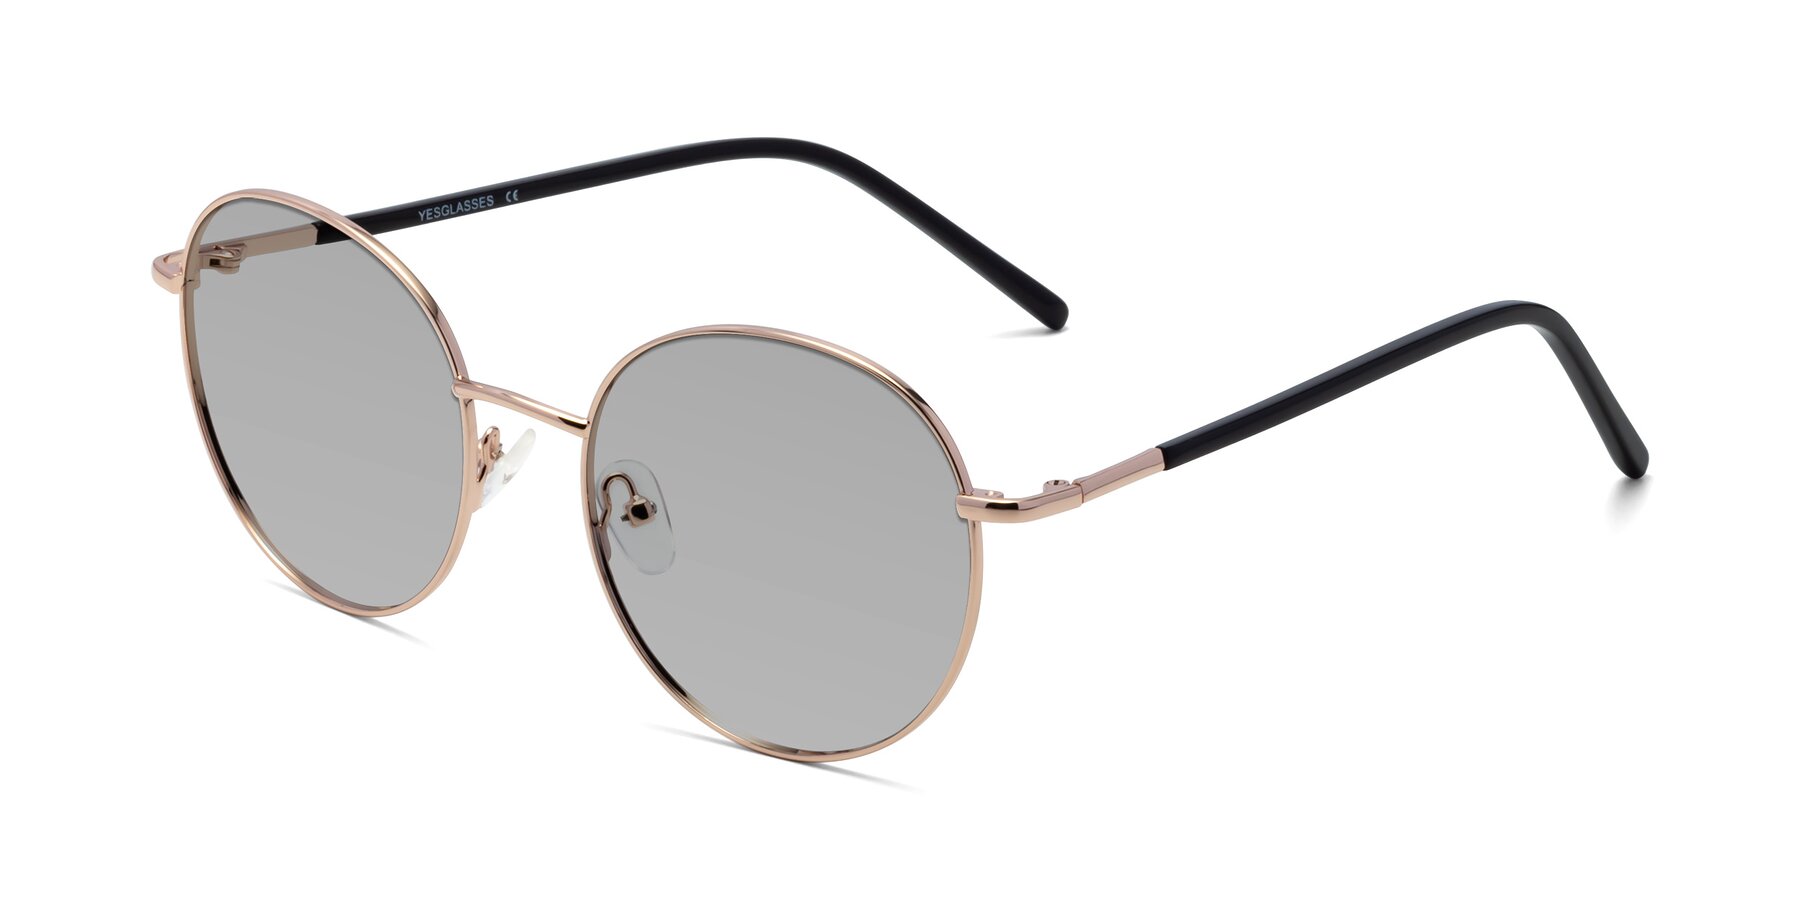 Angle of Cosmos in Rose Gold with Light Gray Tinted Lenses